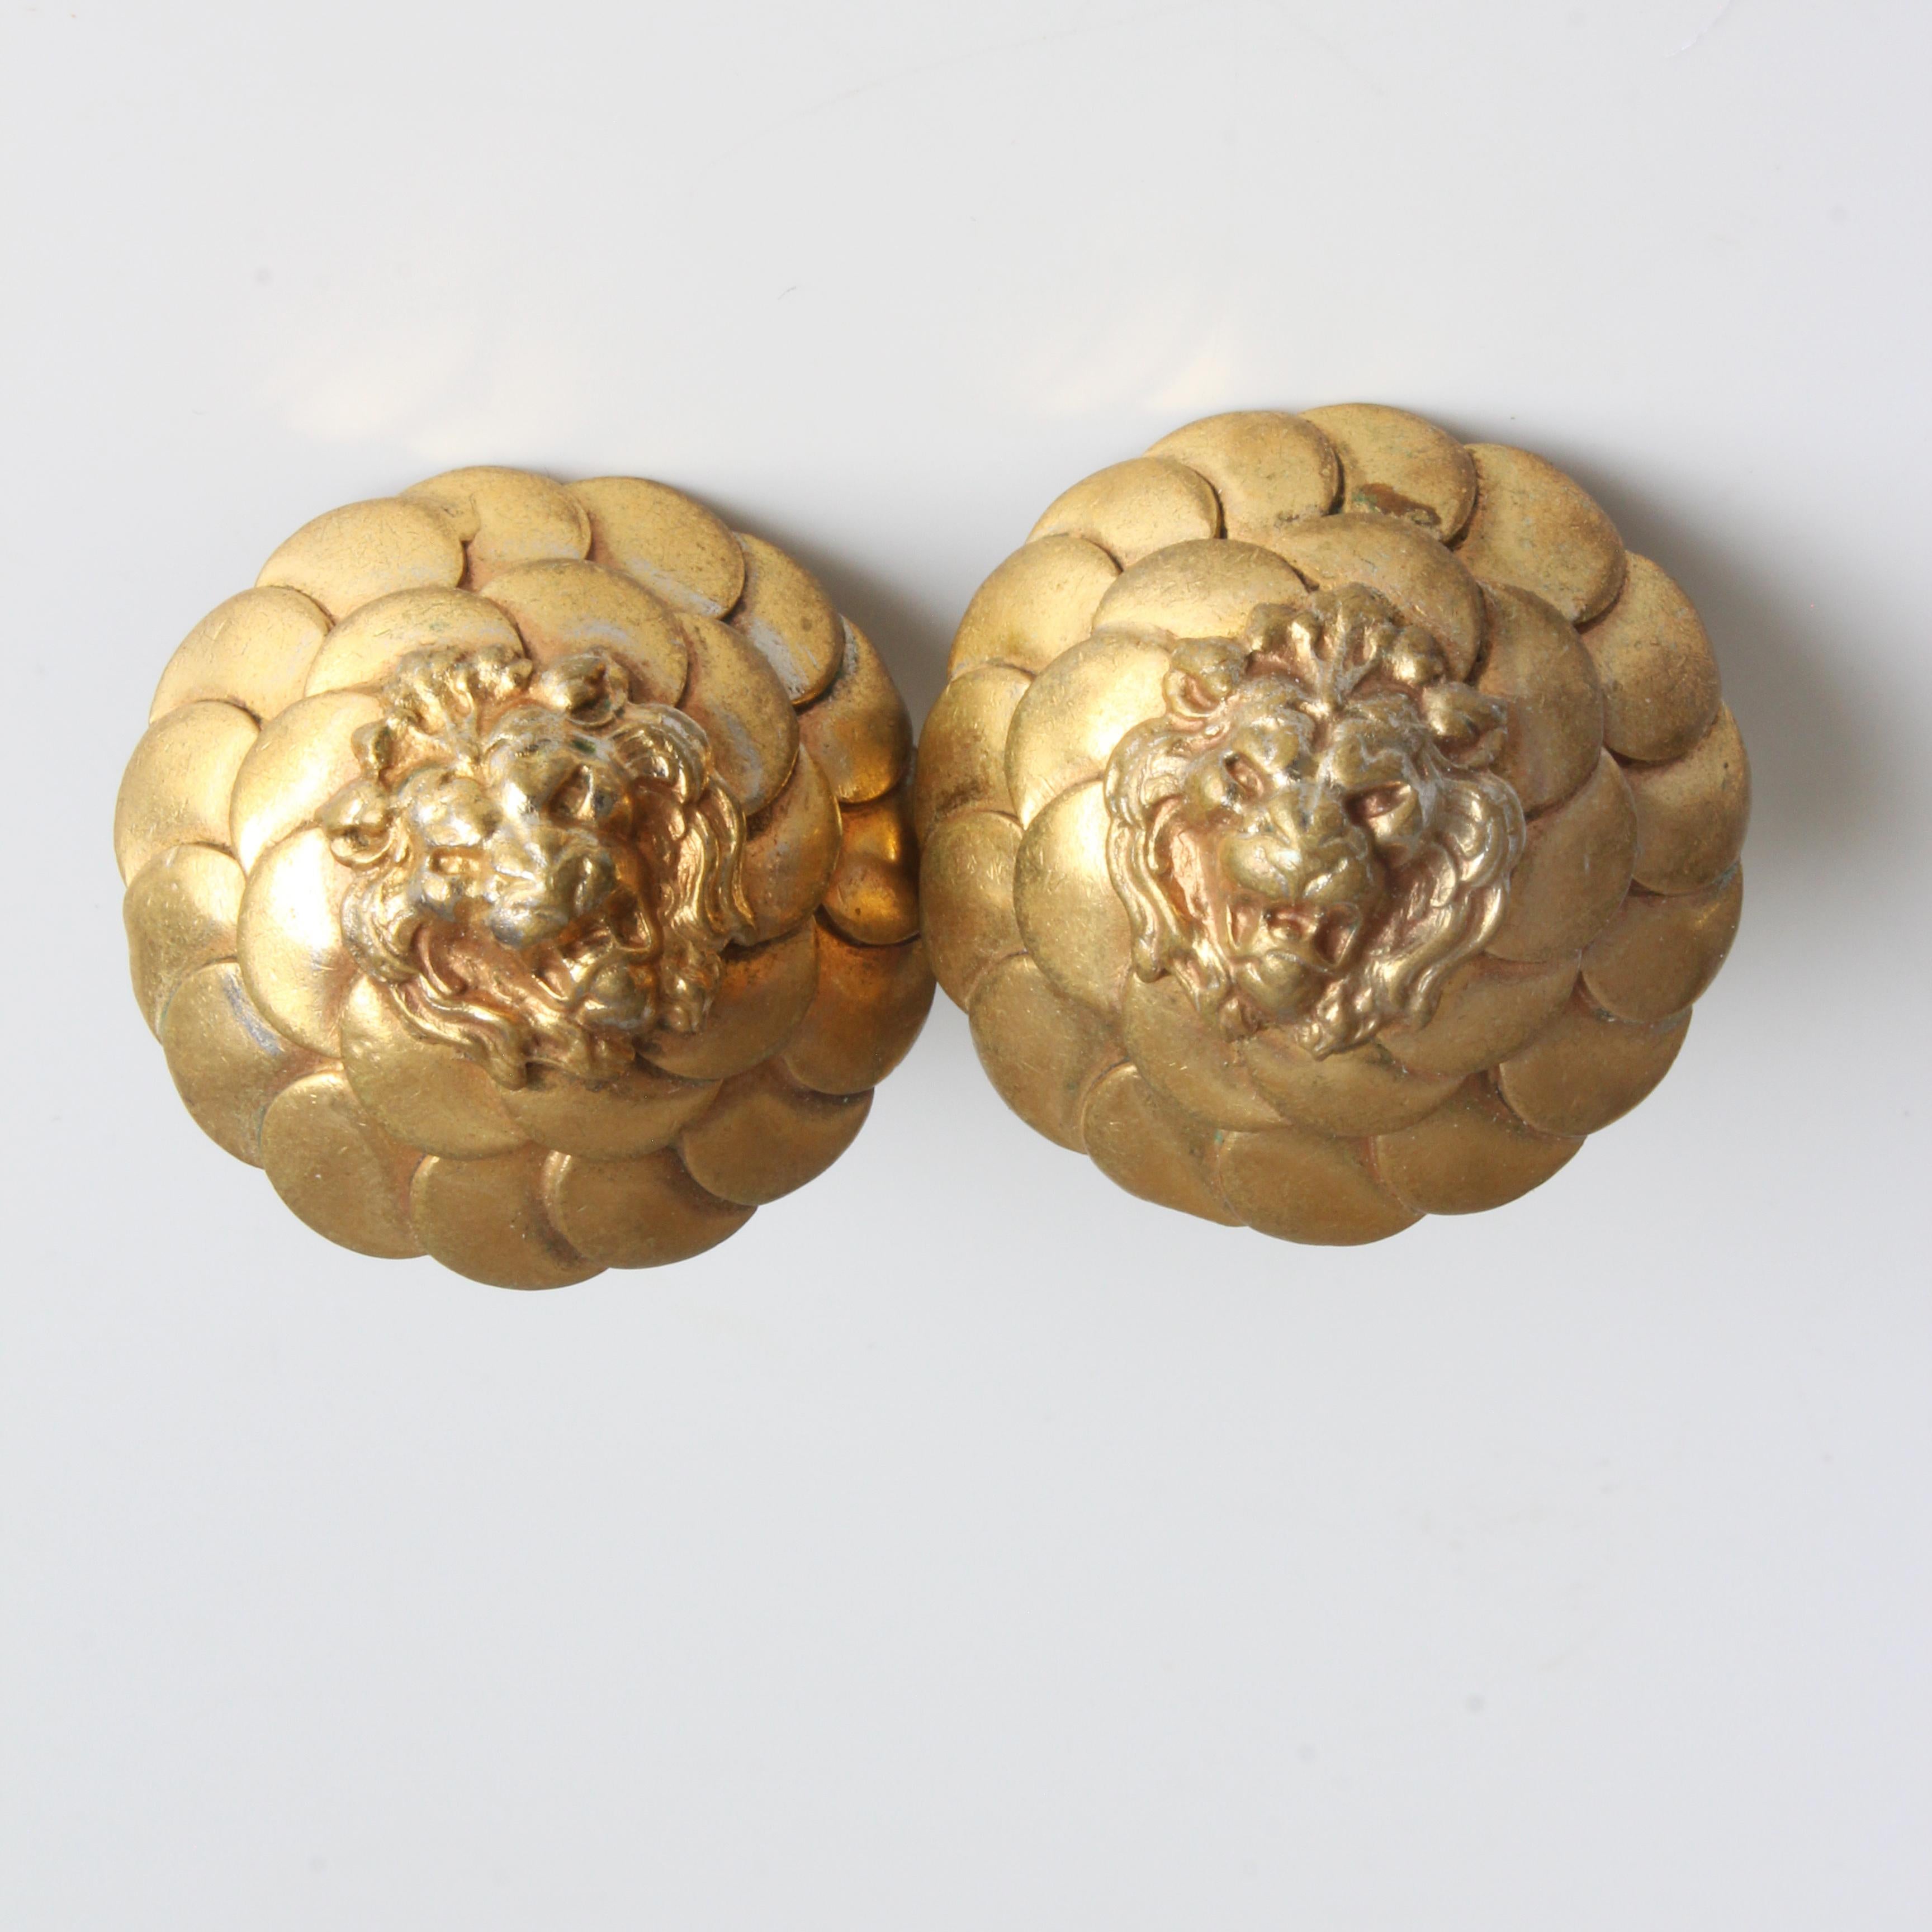 Chanel Earrings Roaring Lion Head Clip Style Gold Metal Rare Vintage 1970s  In Fair Condition For Sale In Port Saint Lucie, FL